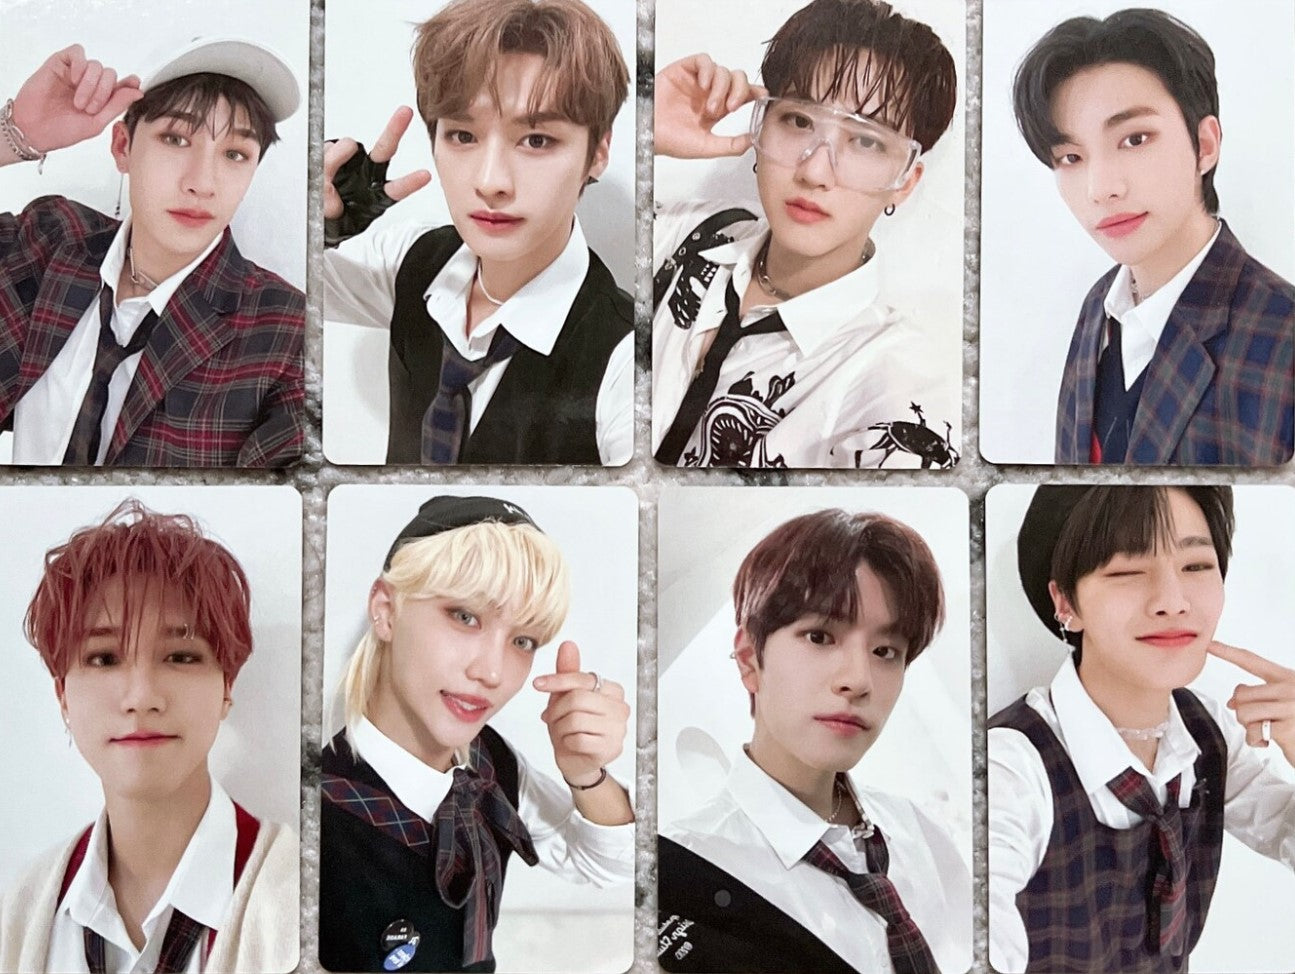 (Collect) Stray Kids (OFFICIAL) Christmas EveL- POB PCs